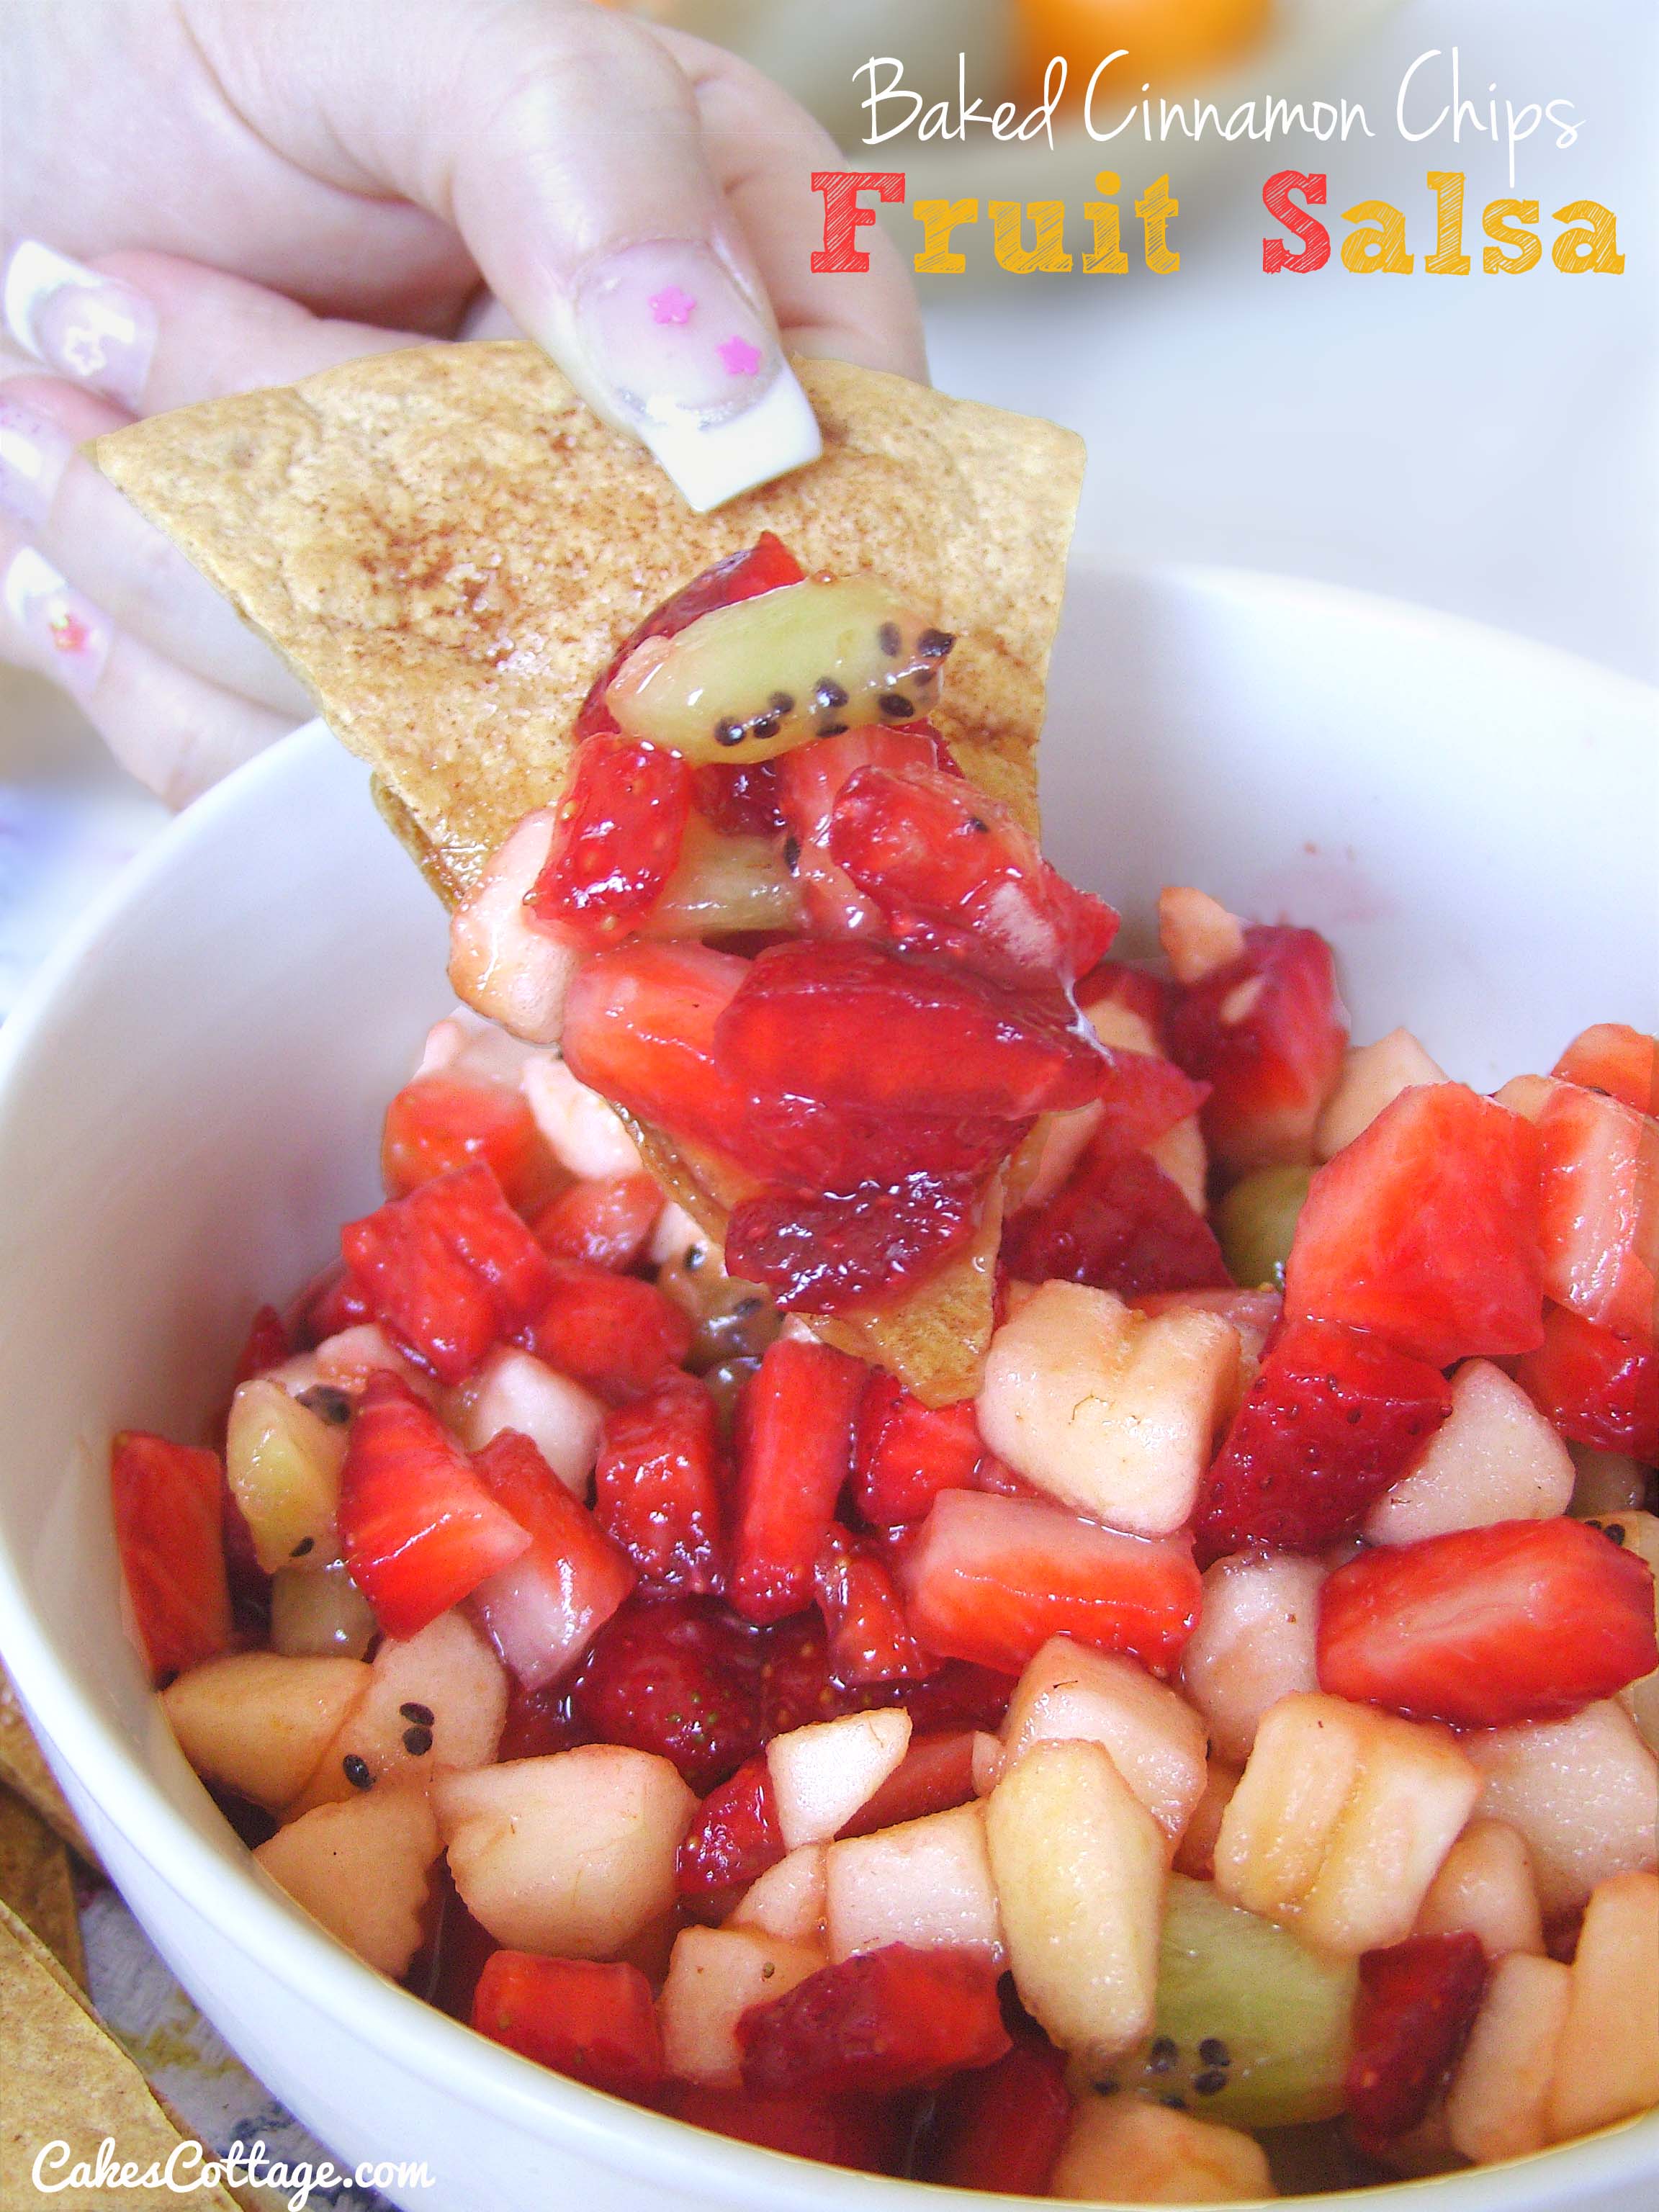 Fresh Fruit Salsa With Baked Cinnamon Chips Cakescottage